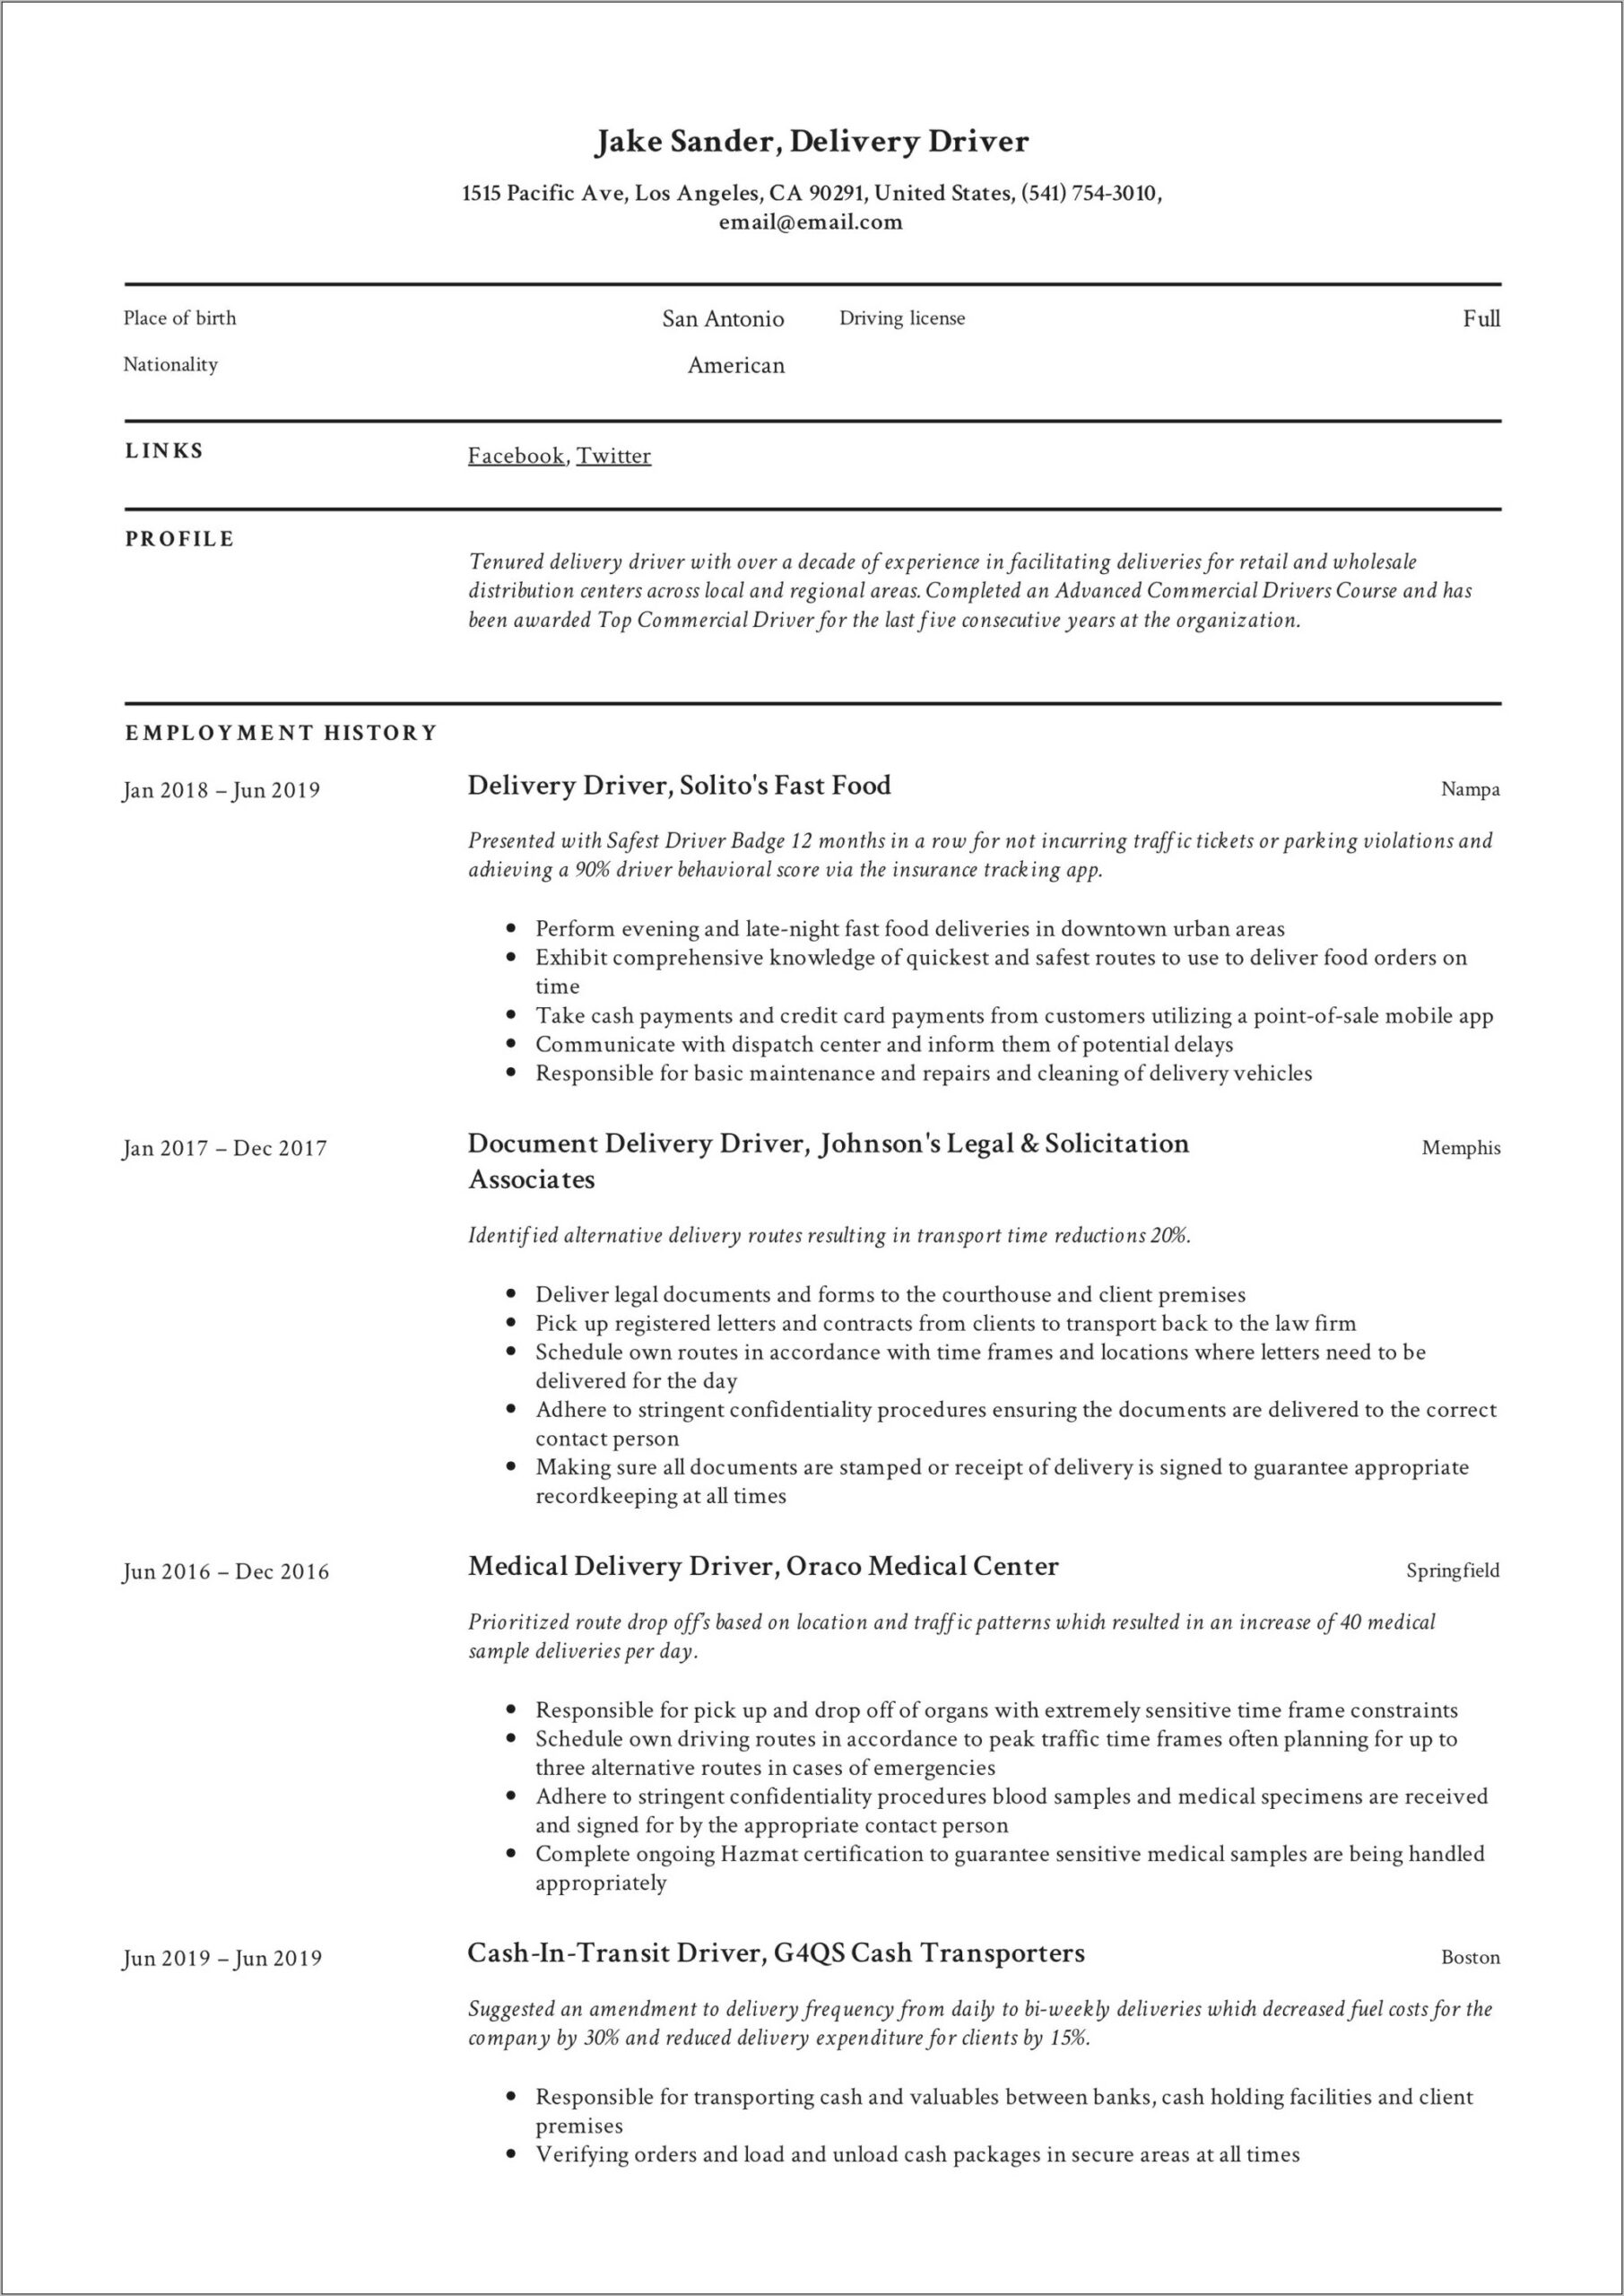 Resume Objective For A Delivery Driver